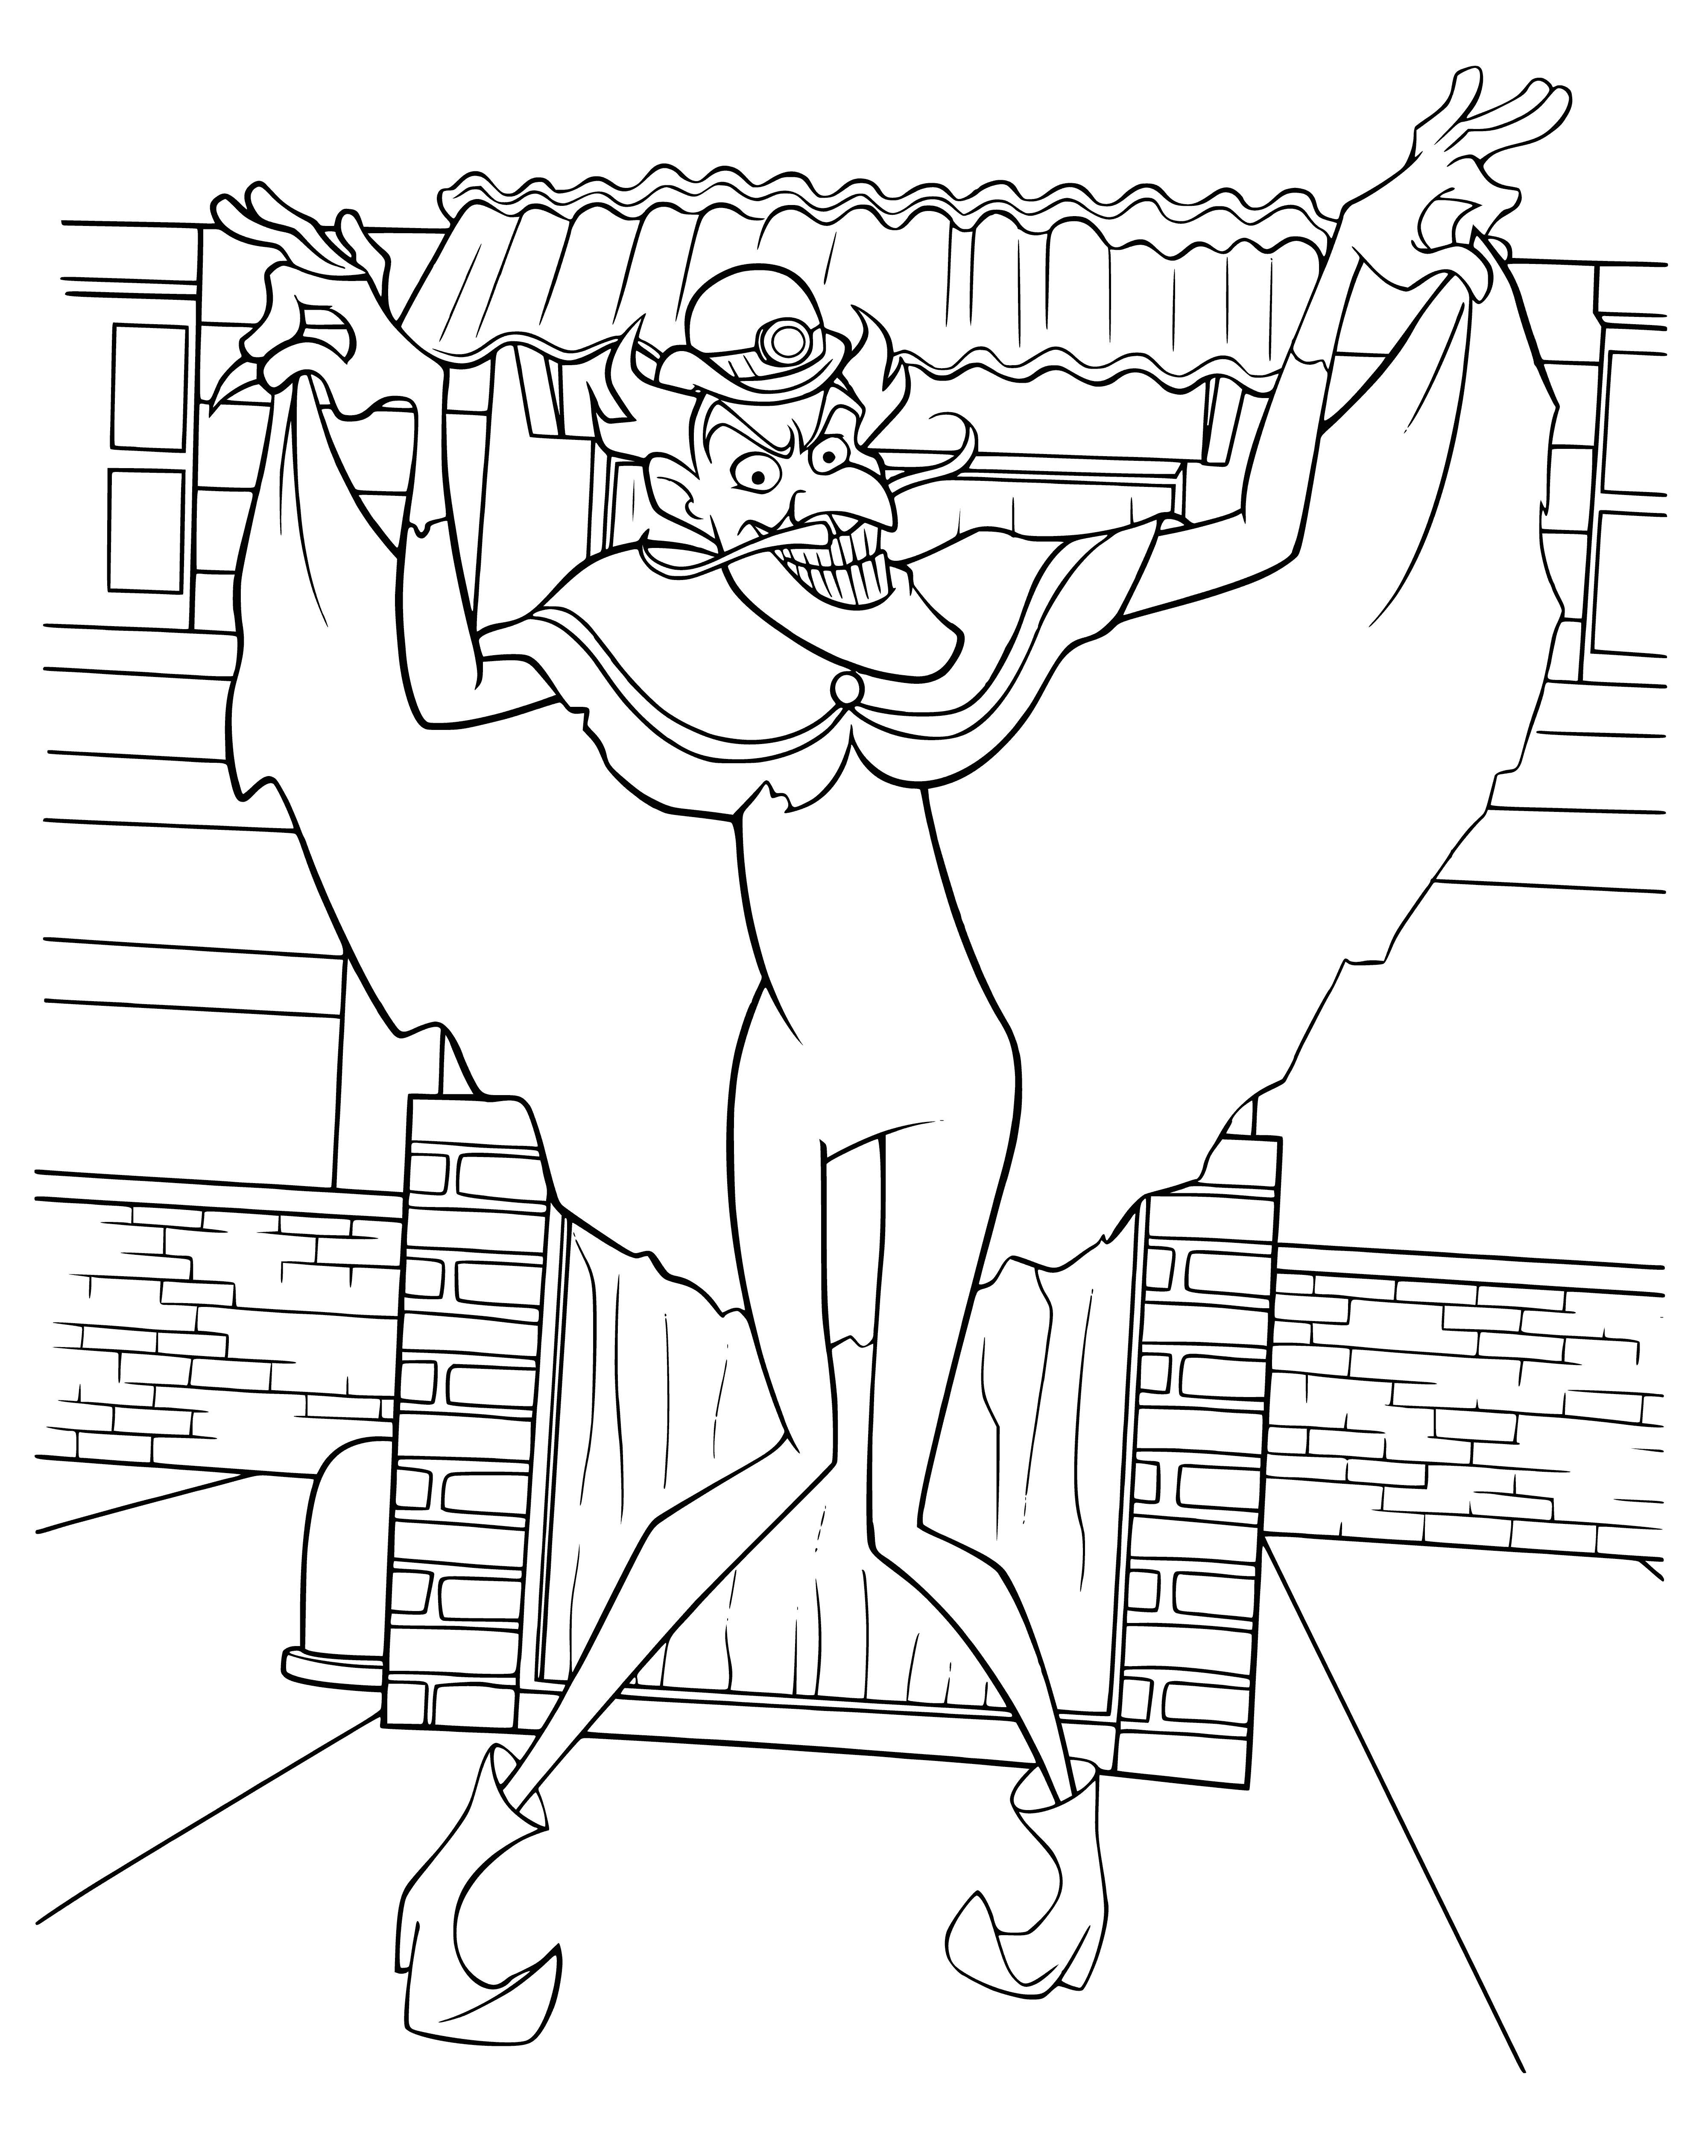 The villain in the bowler hat coloring page